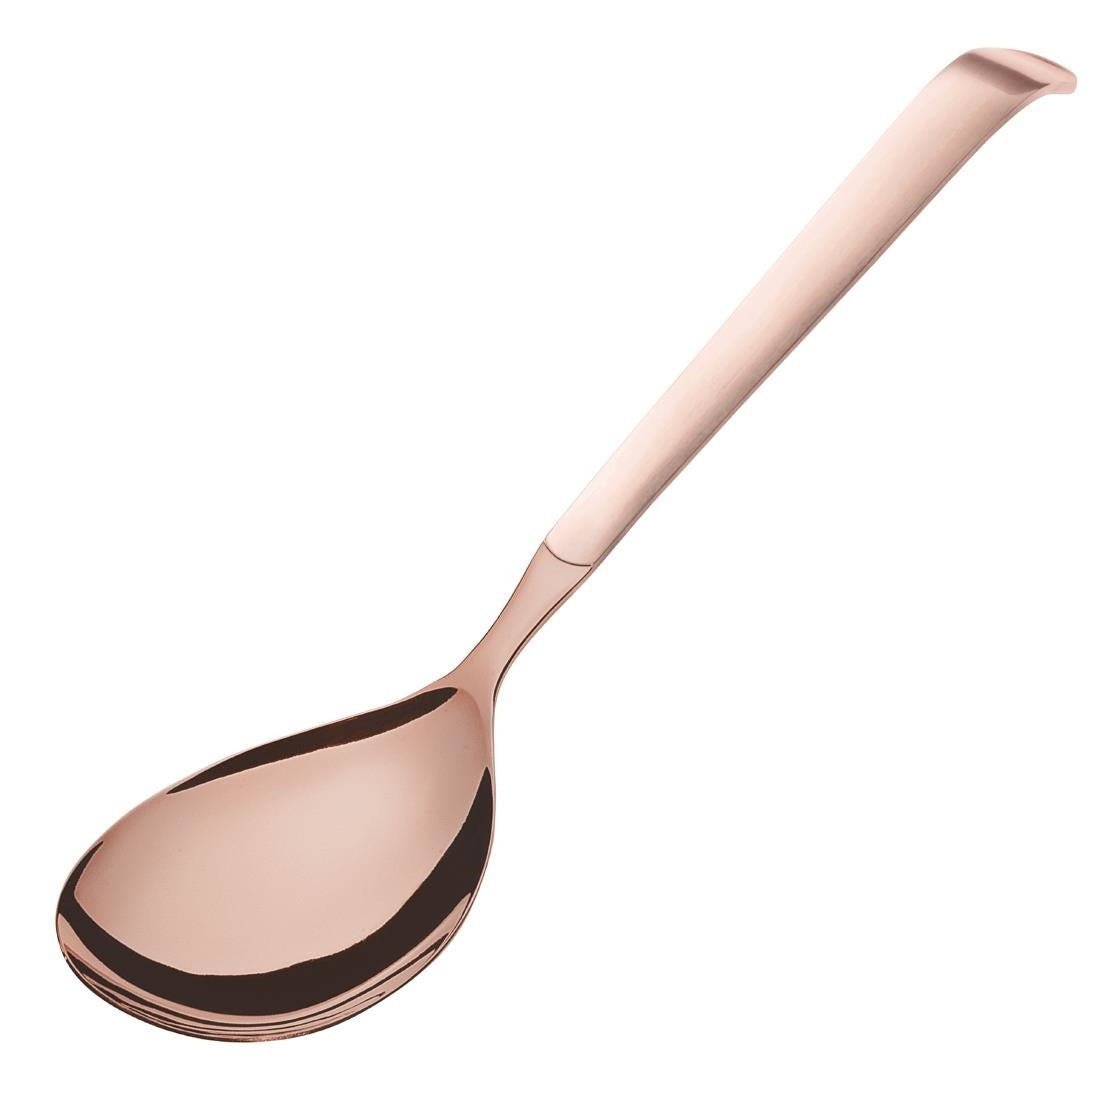 DX646 Amefa Buffet Solid Serving Spoon Copper (Pack of 6)